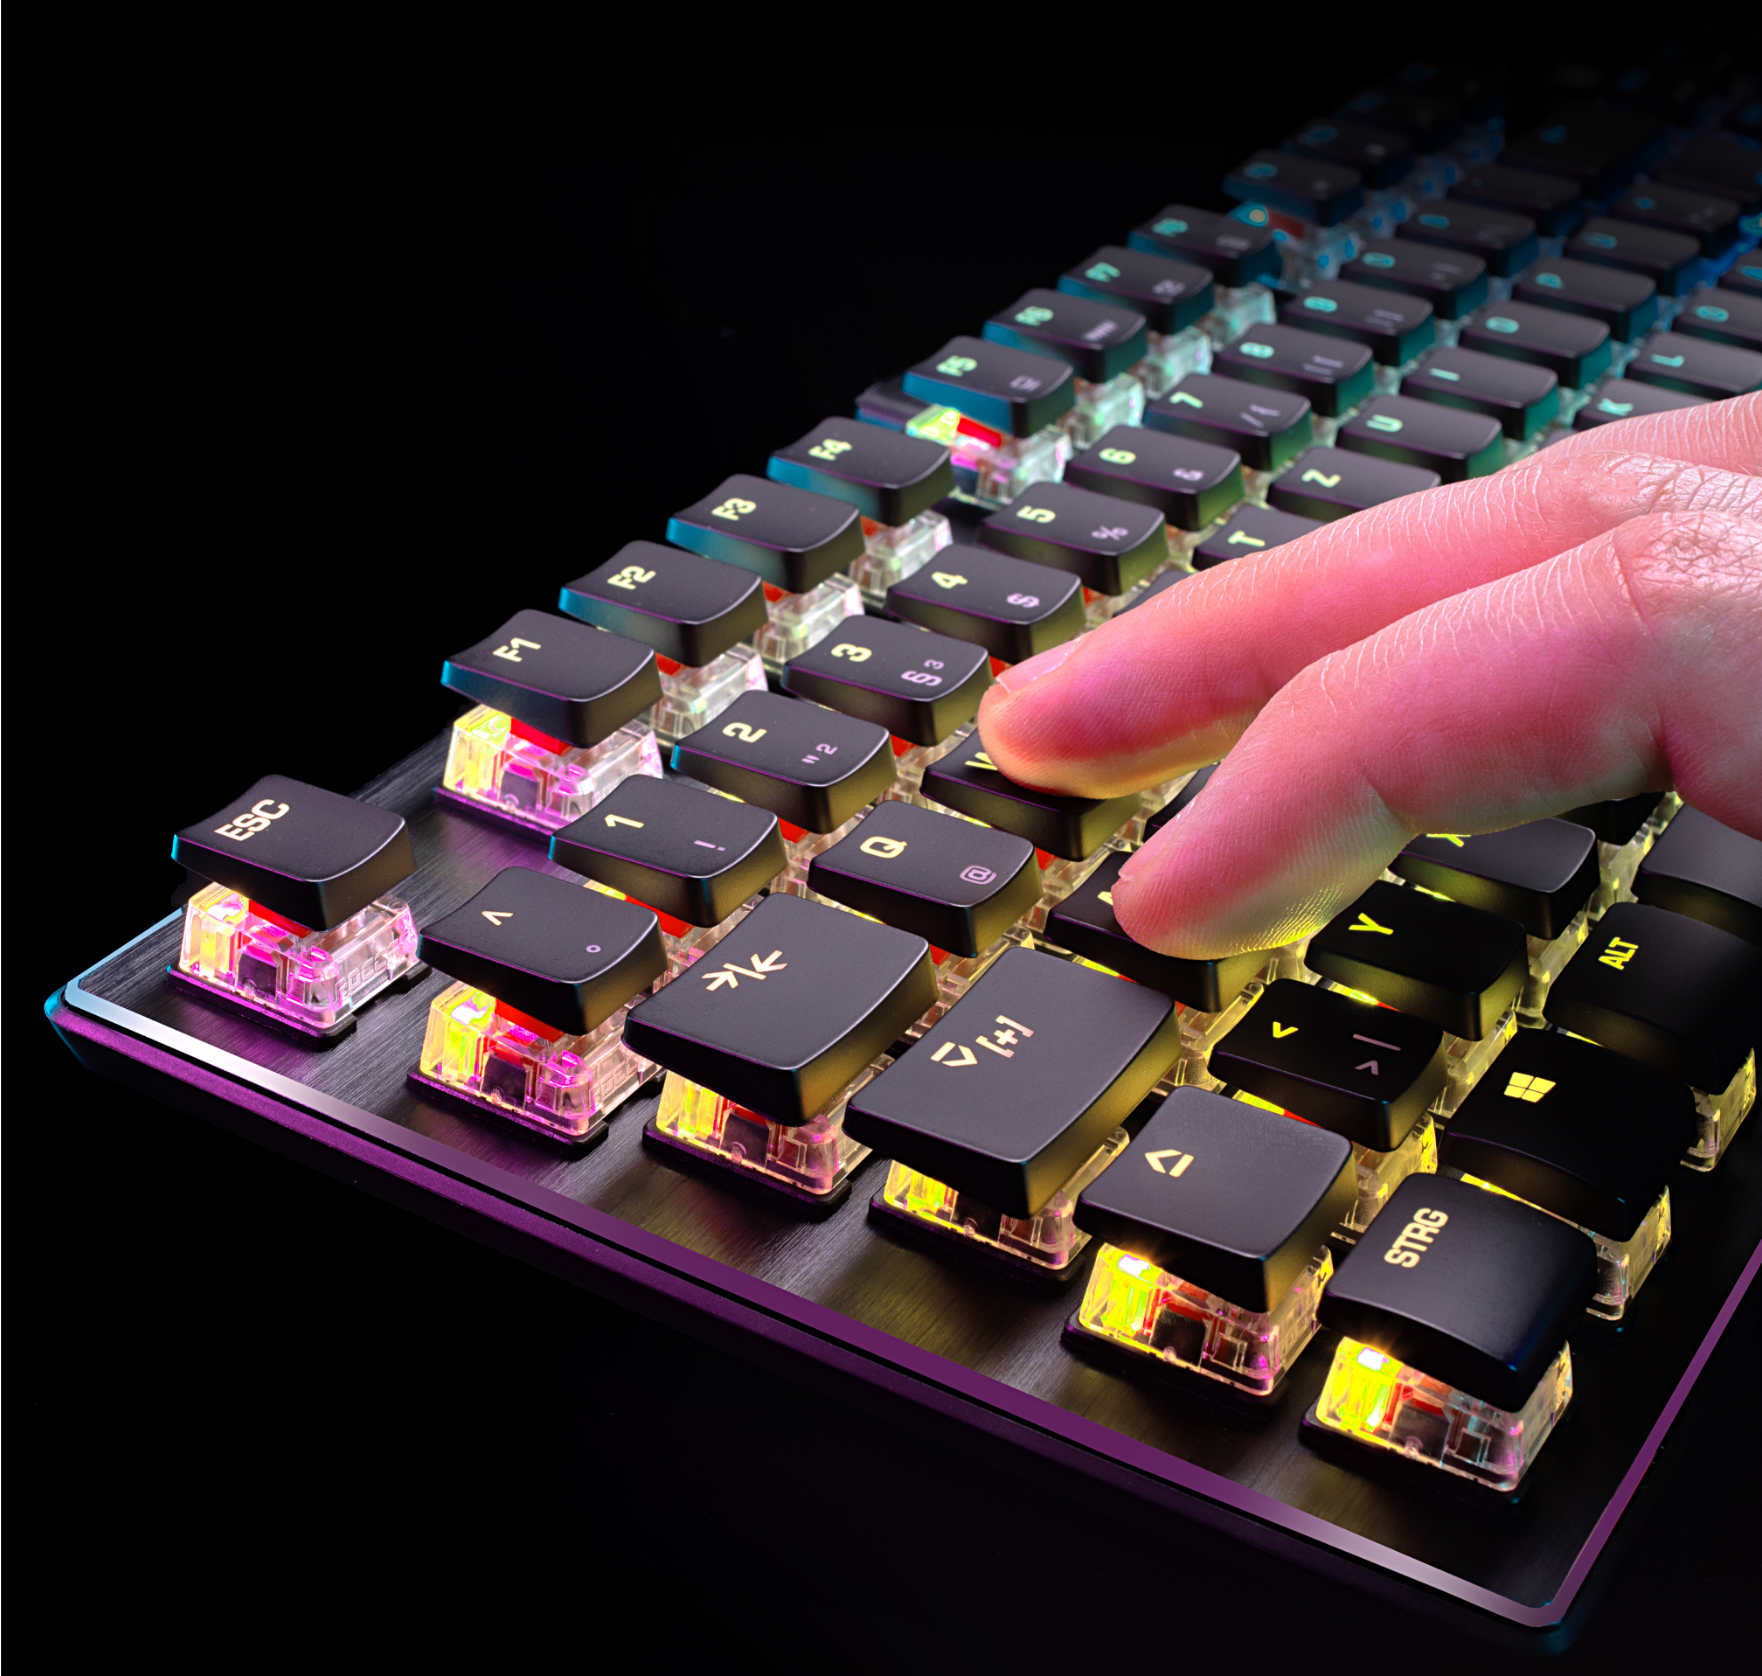 Close-up of the vulcan keyboard with 2 fingers on WASD area